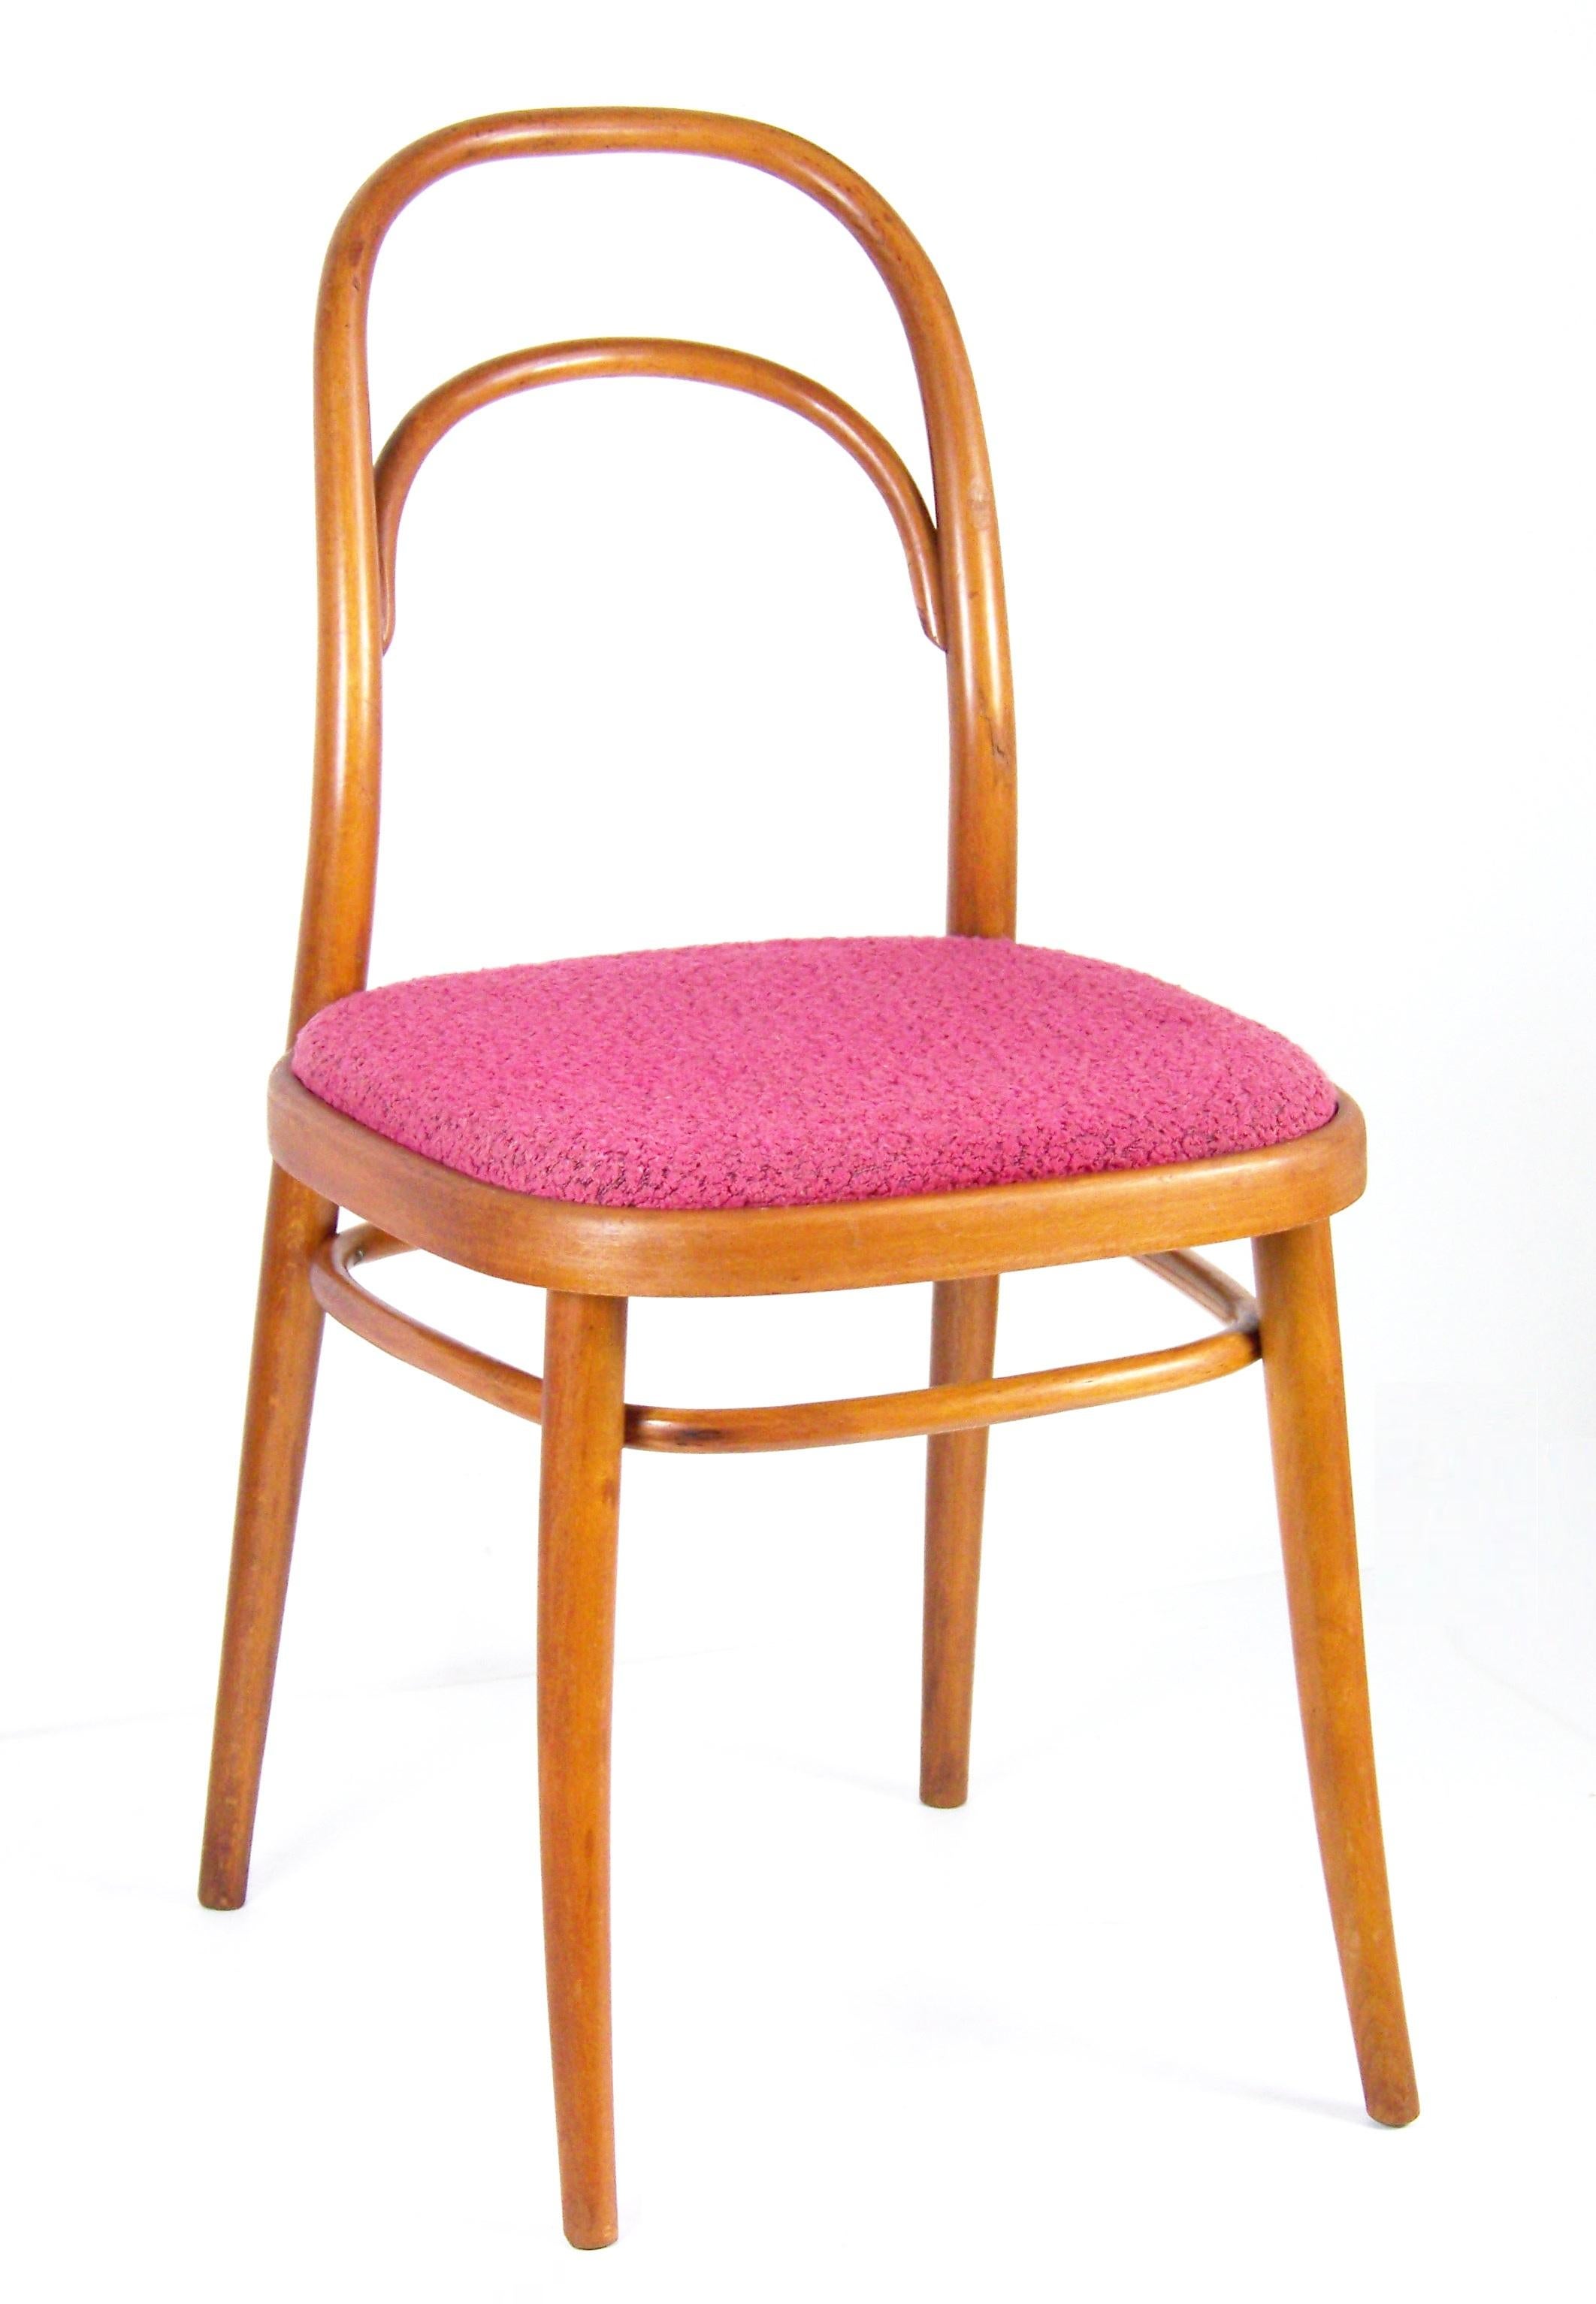 Variant chair no. 1668, designed in 1967 by arch. Antonín Šuman in Czechoslovakia. The chair won important design competitions in its time. In contrast to chair no. 1668 to export abroad, chair no. 1667 was sold only to the domestic market. Good